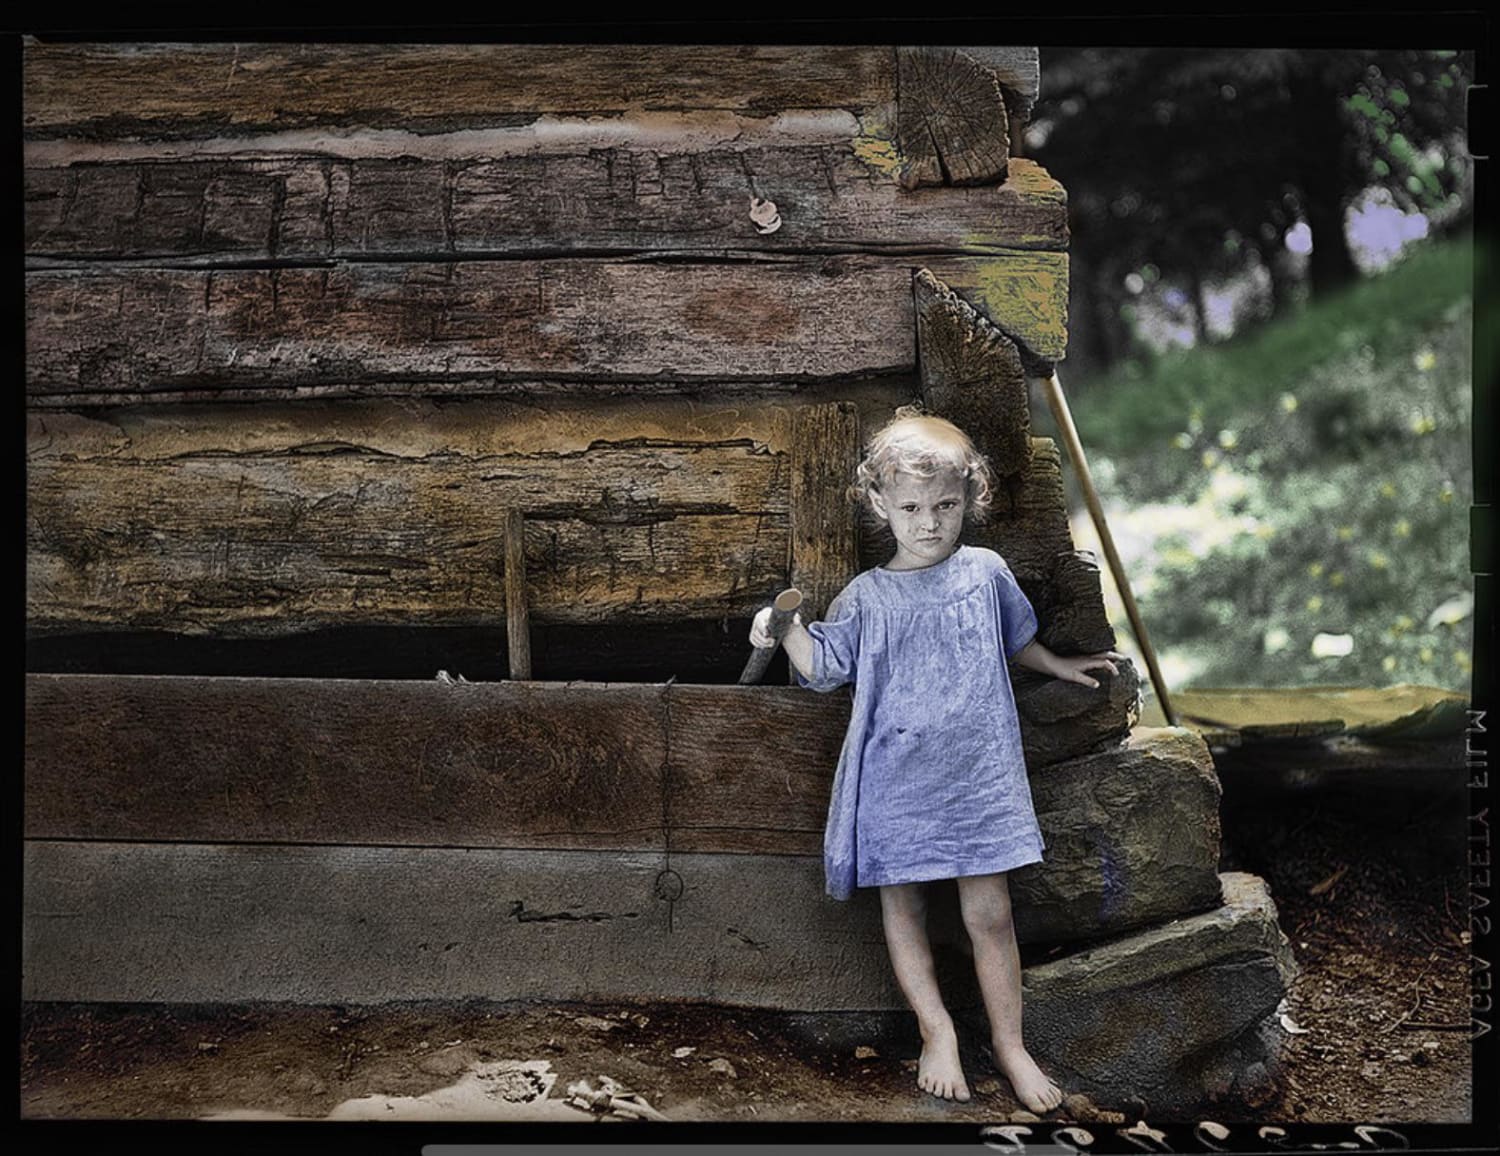 1938 - Indiana girl by cabin